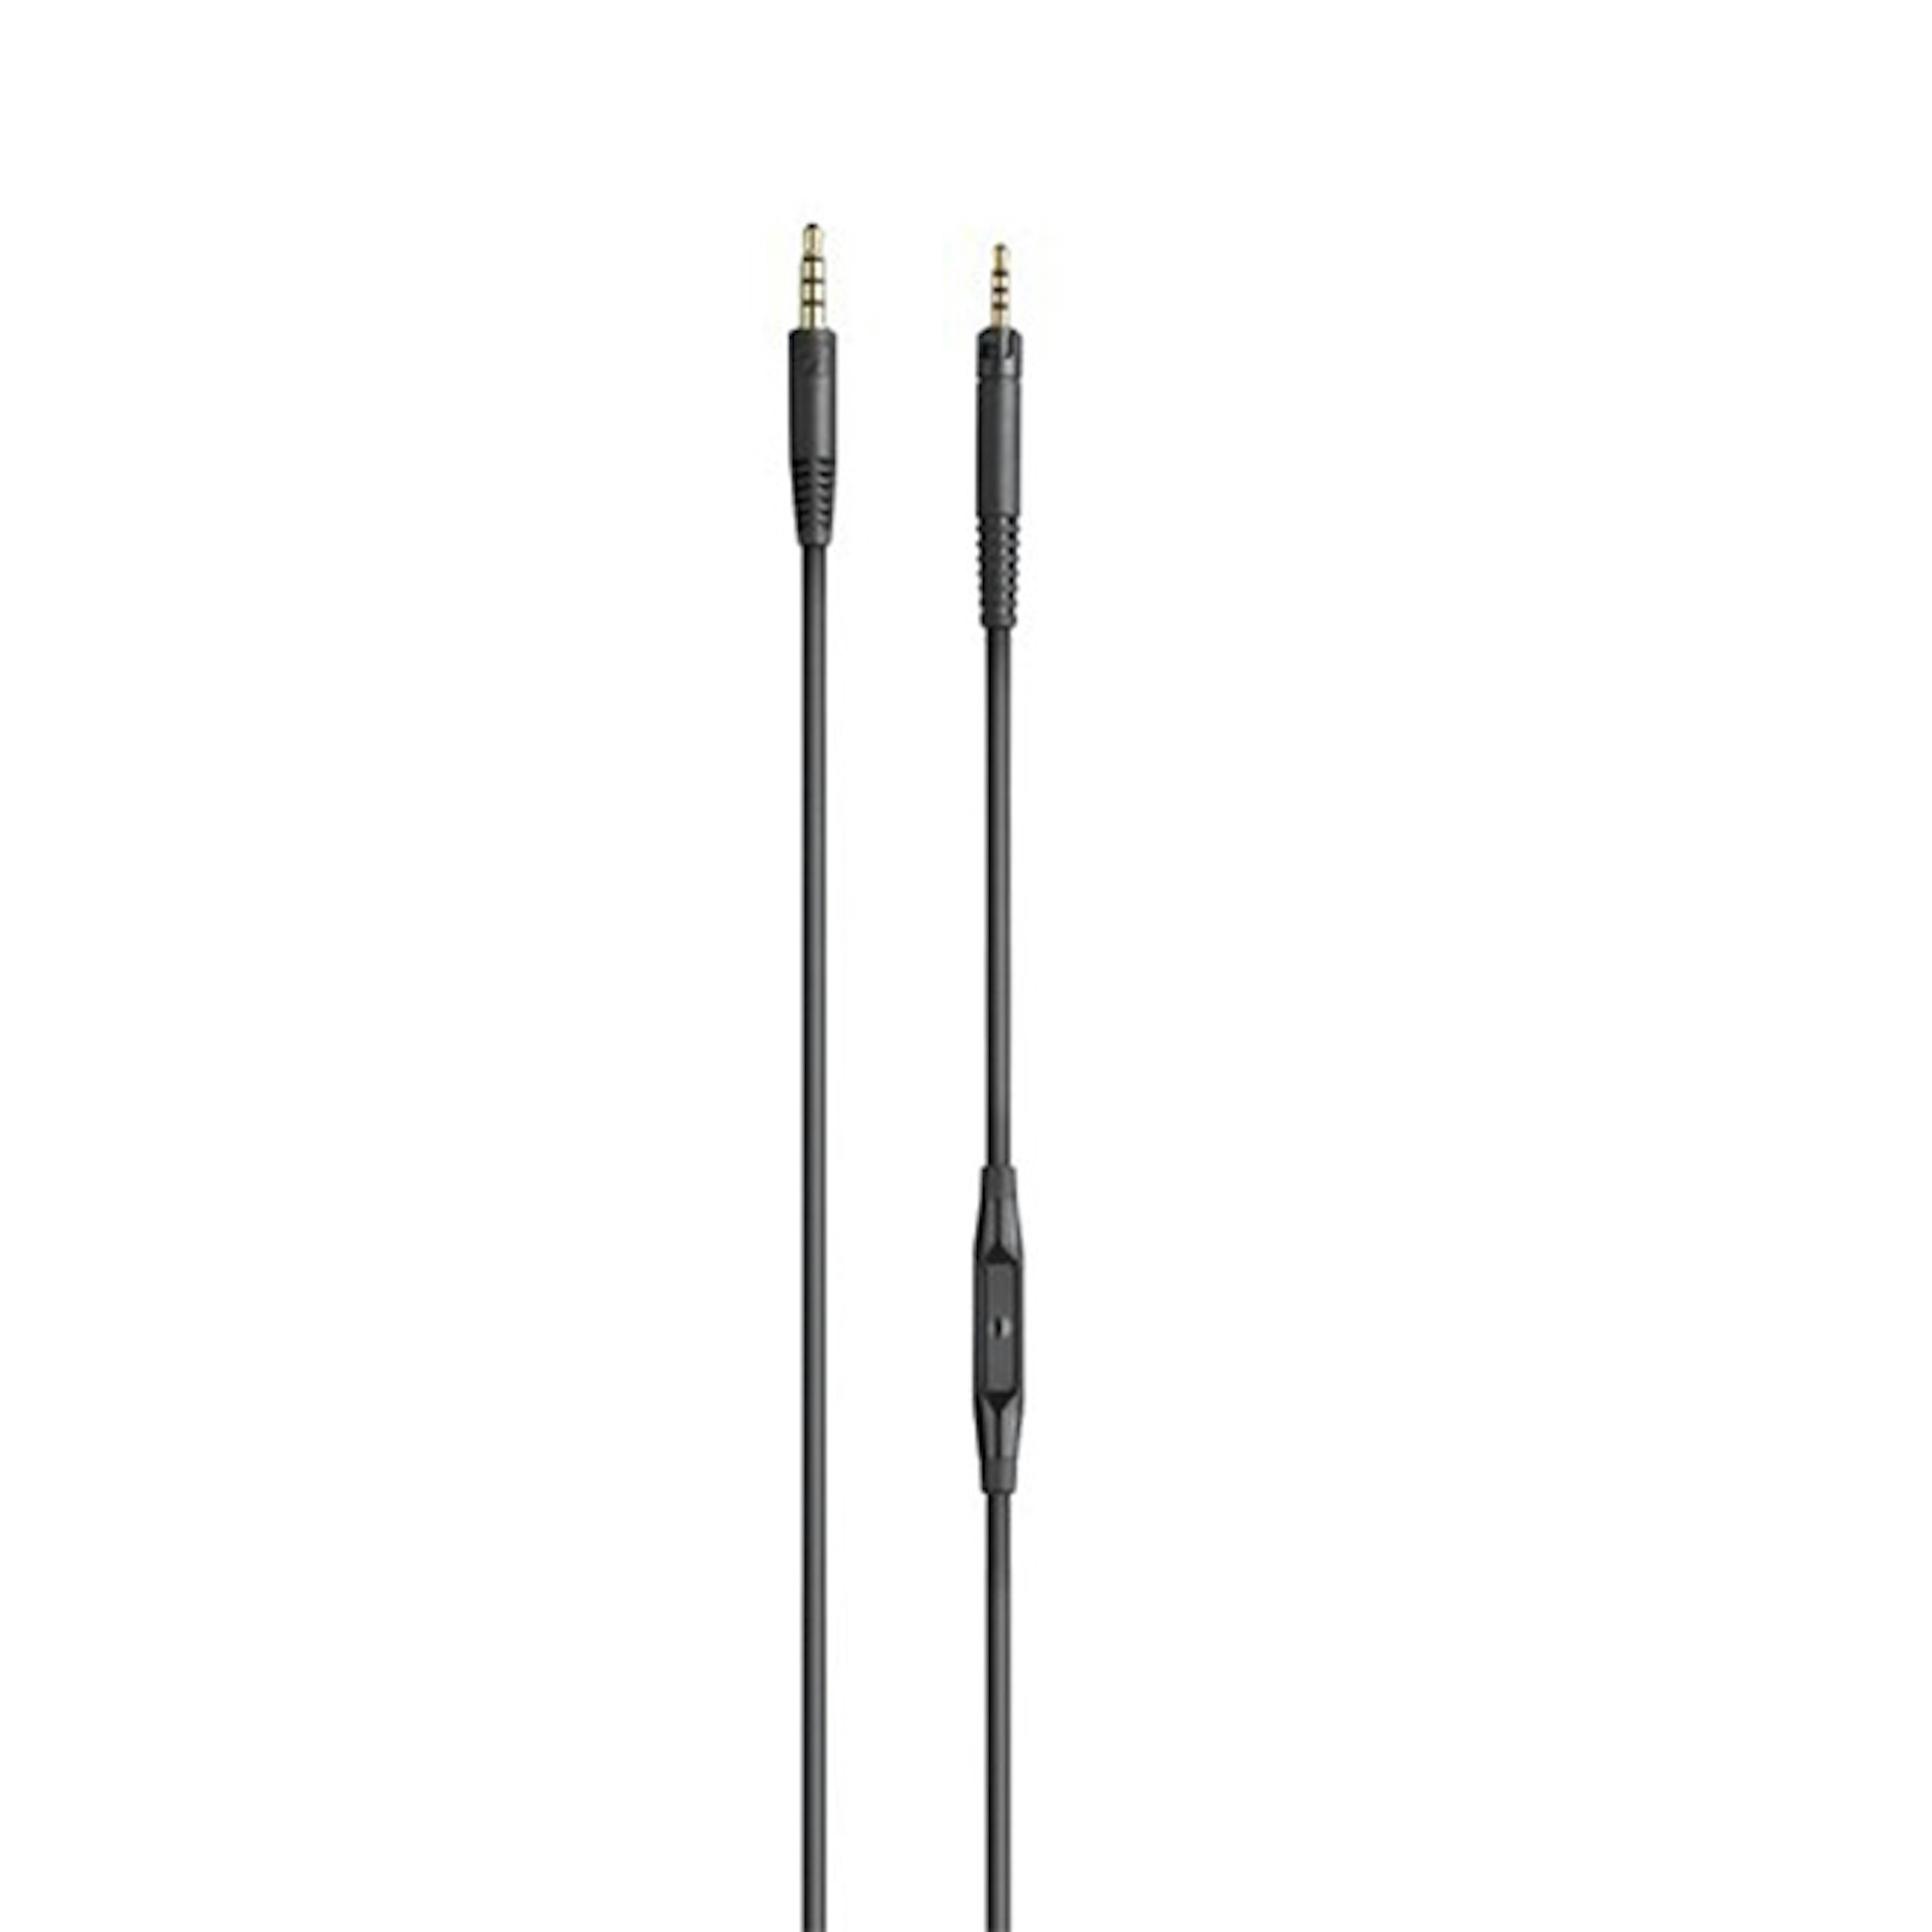 Connecting cable with microphone, 1.2m